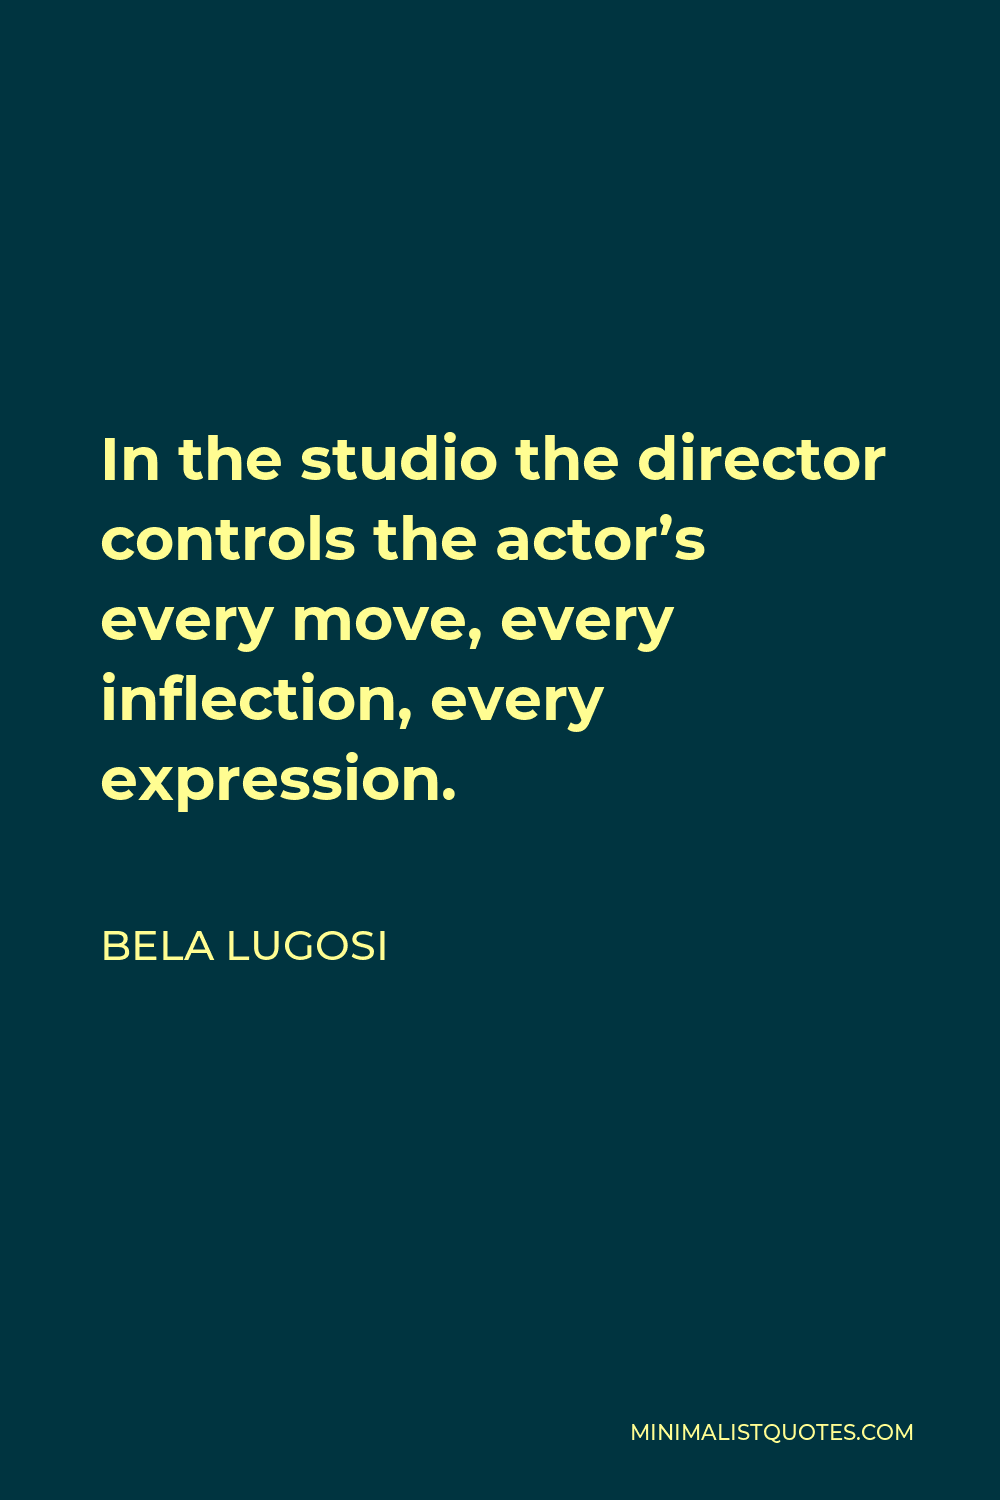 Bela Lugosi Quote - In the studio the director controls the actor’s every move, every inflection, every expression.